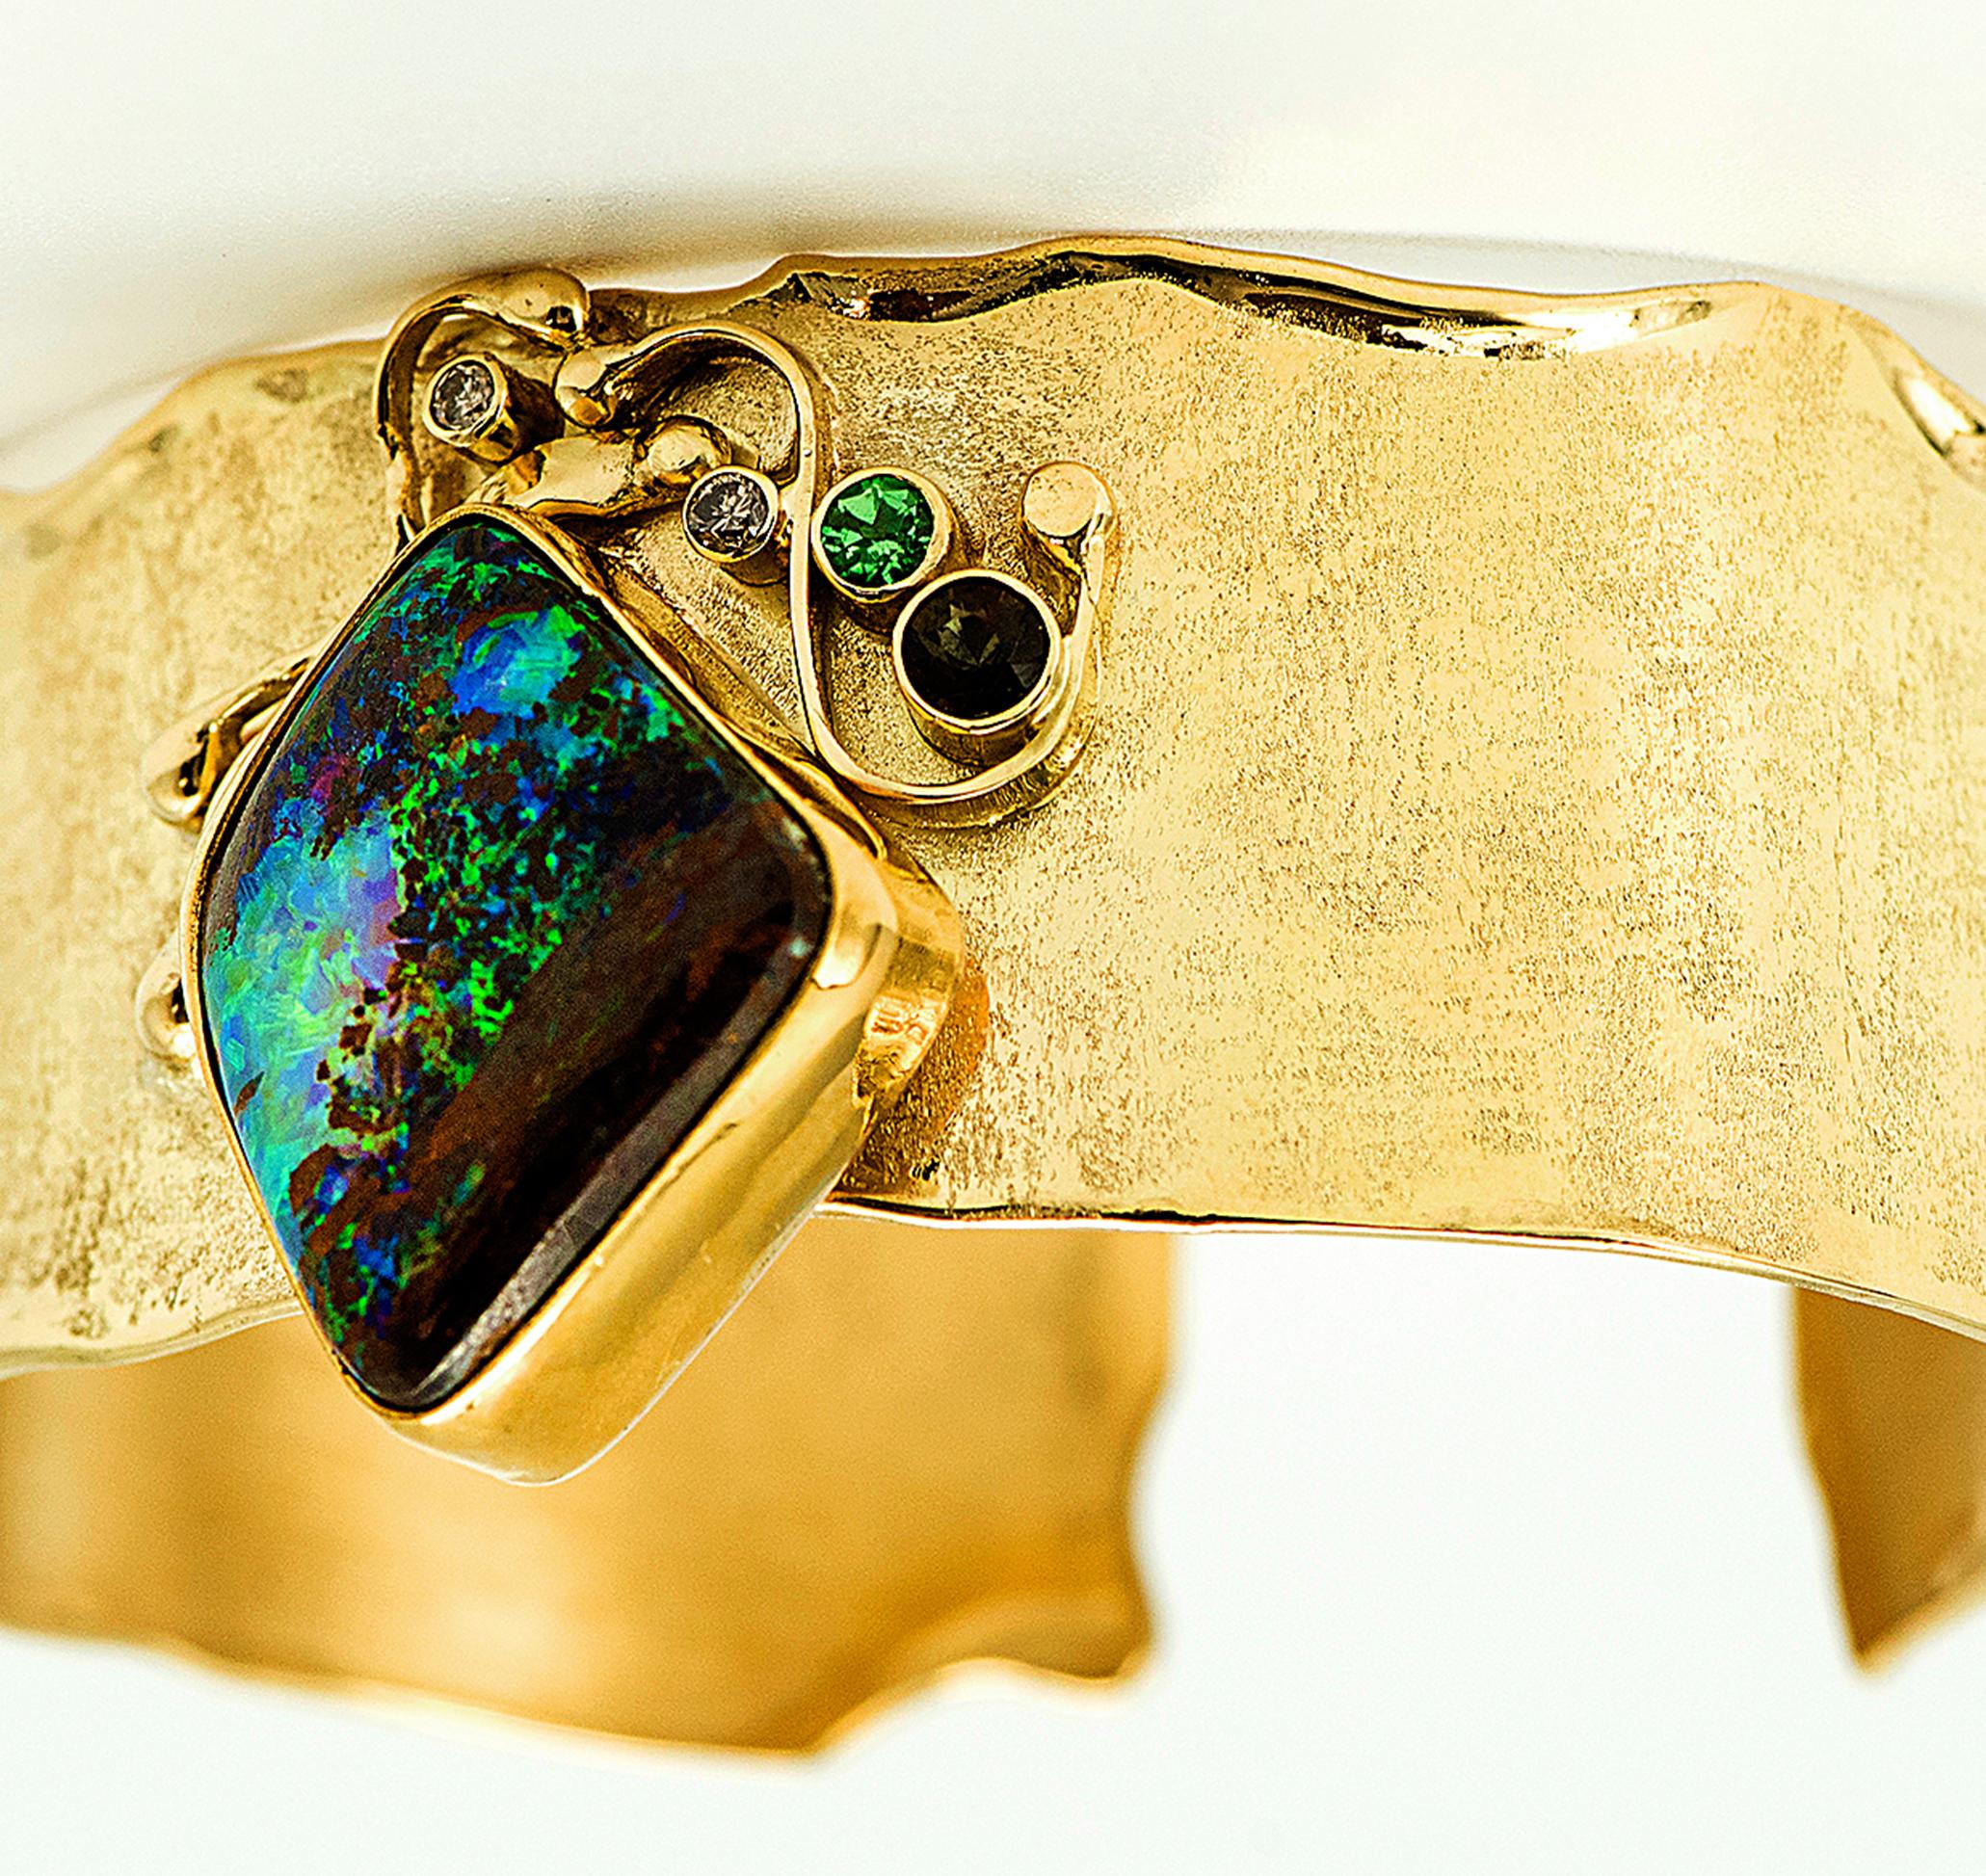 Boulder Opal cuff bracelet with a spectacular green matrix boulder opal.  The cuff is designed with 18k gold and is about 1.0